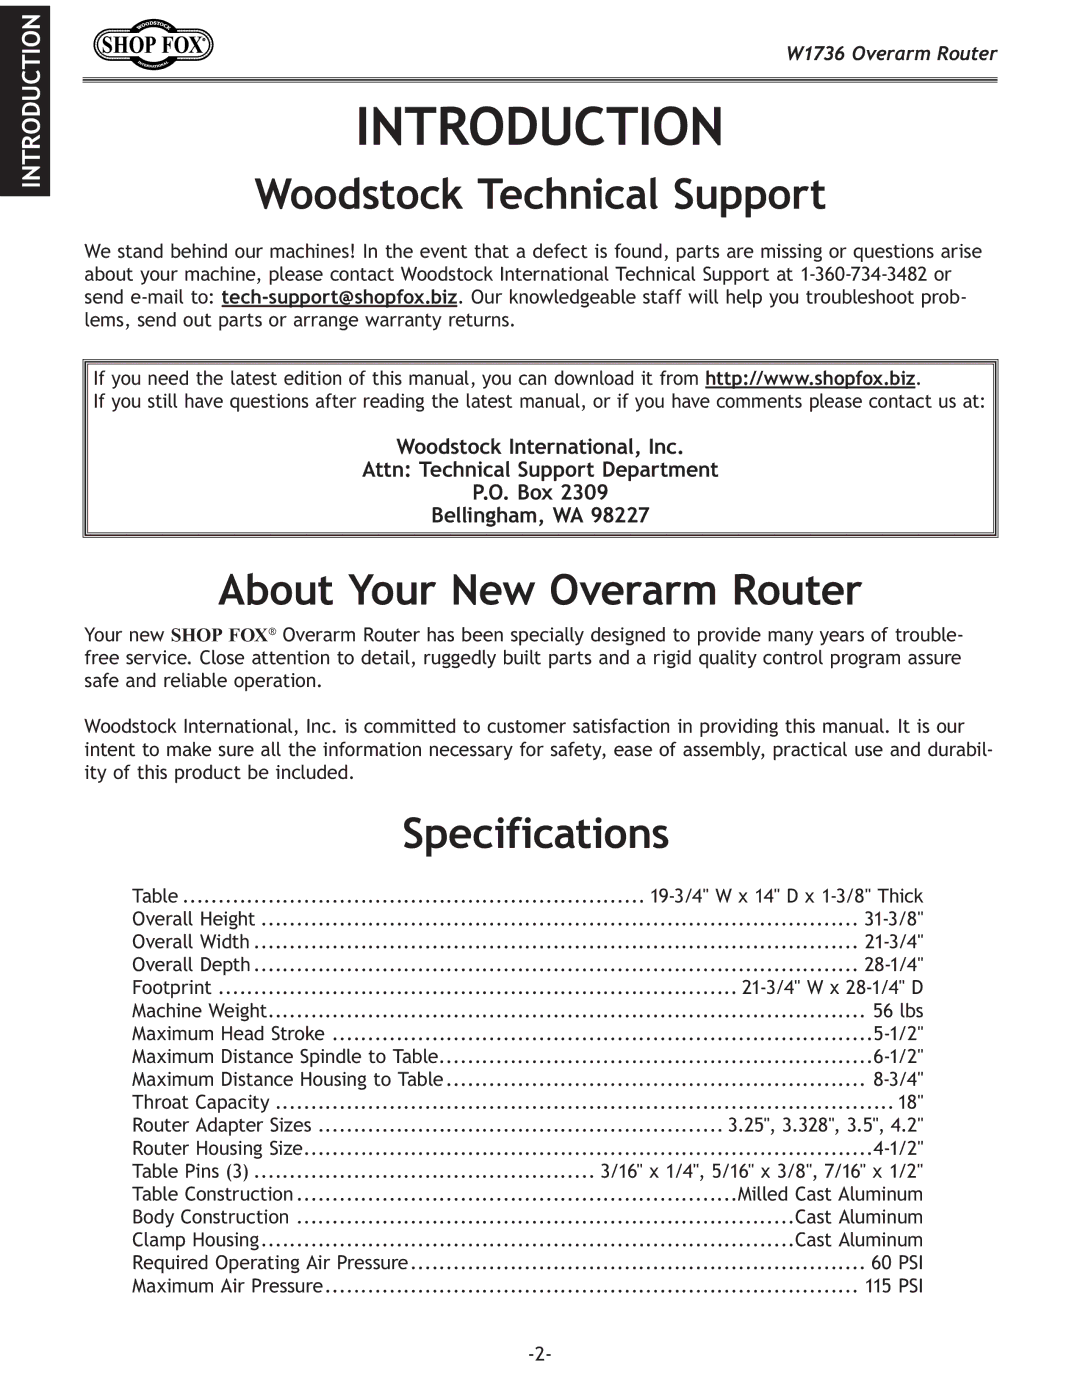 Woodstock W1736 instruction manual Introduction, Woodstock Technical Support, About Your New Overarm Router, Specifications 